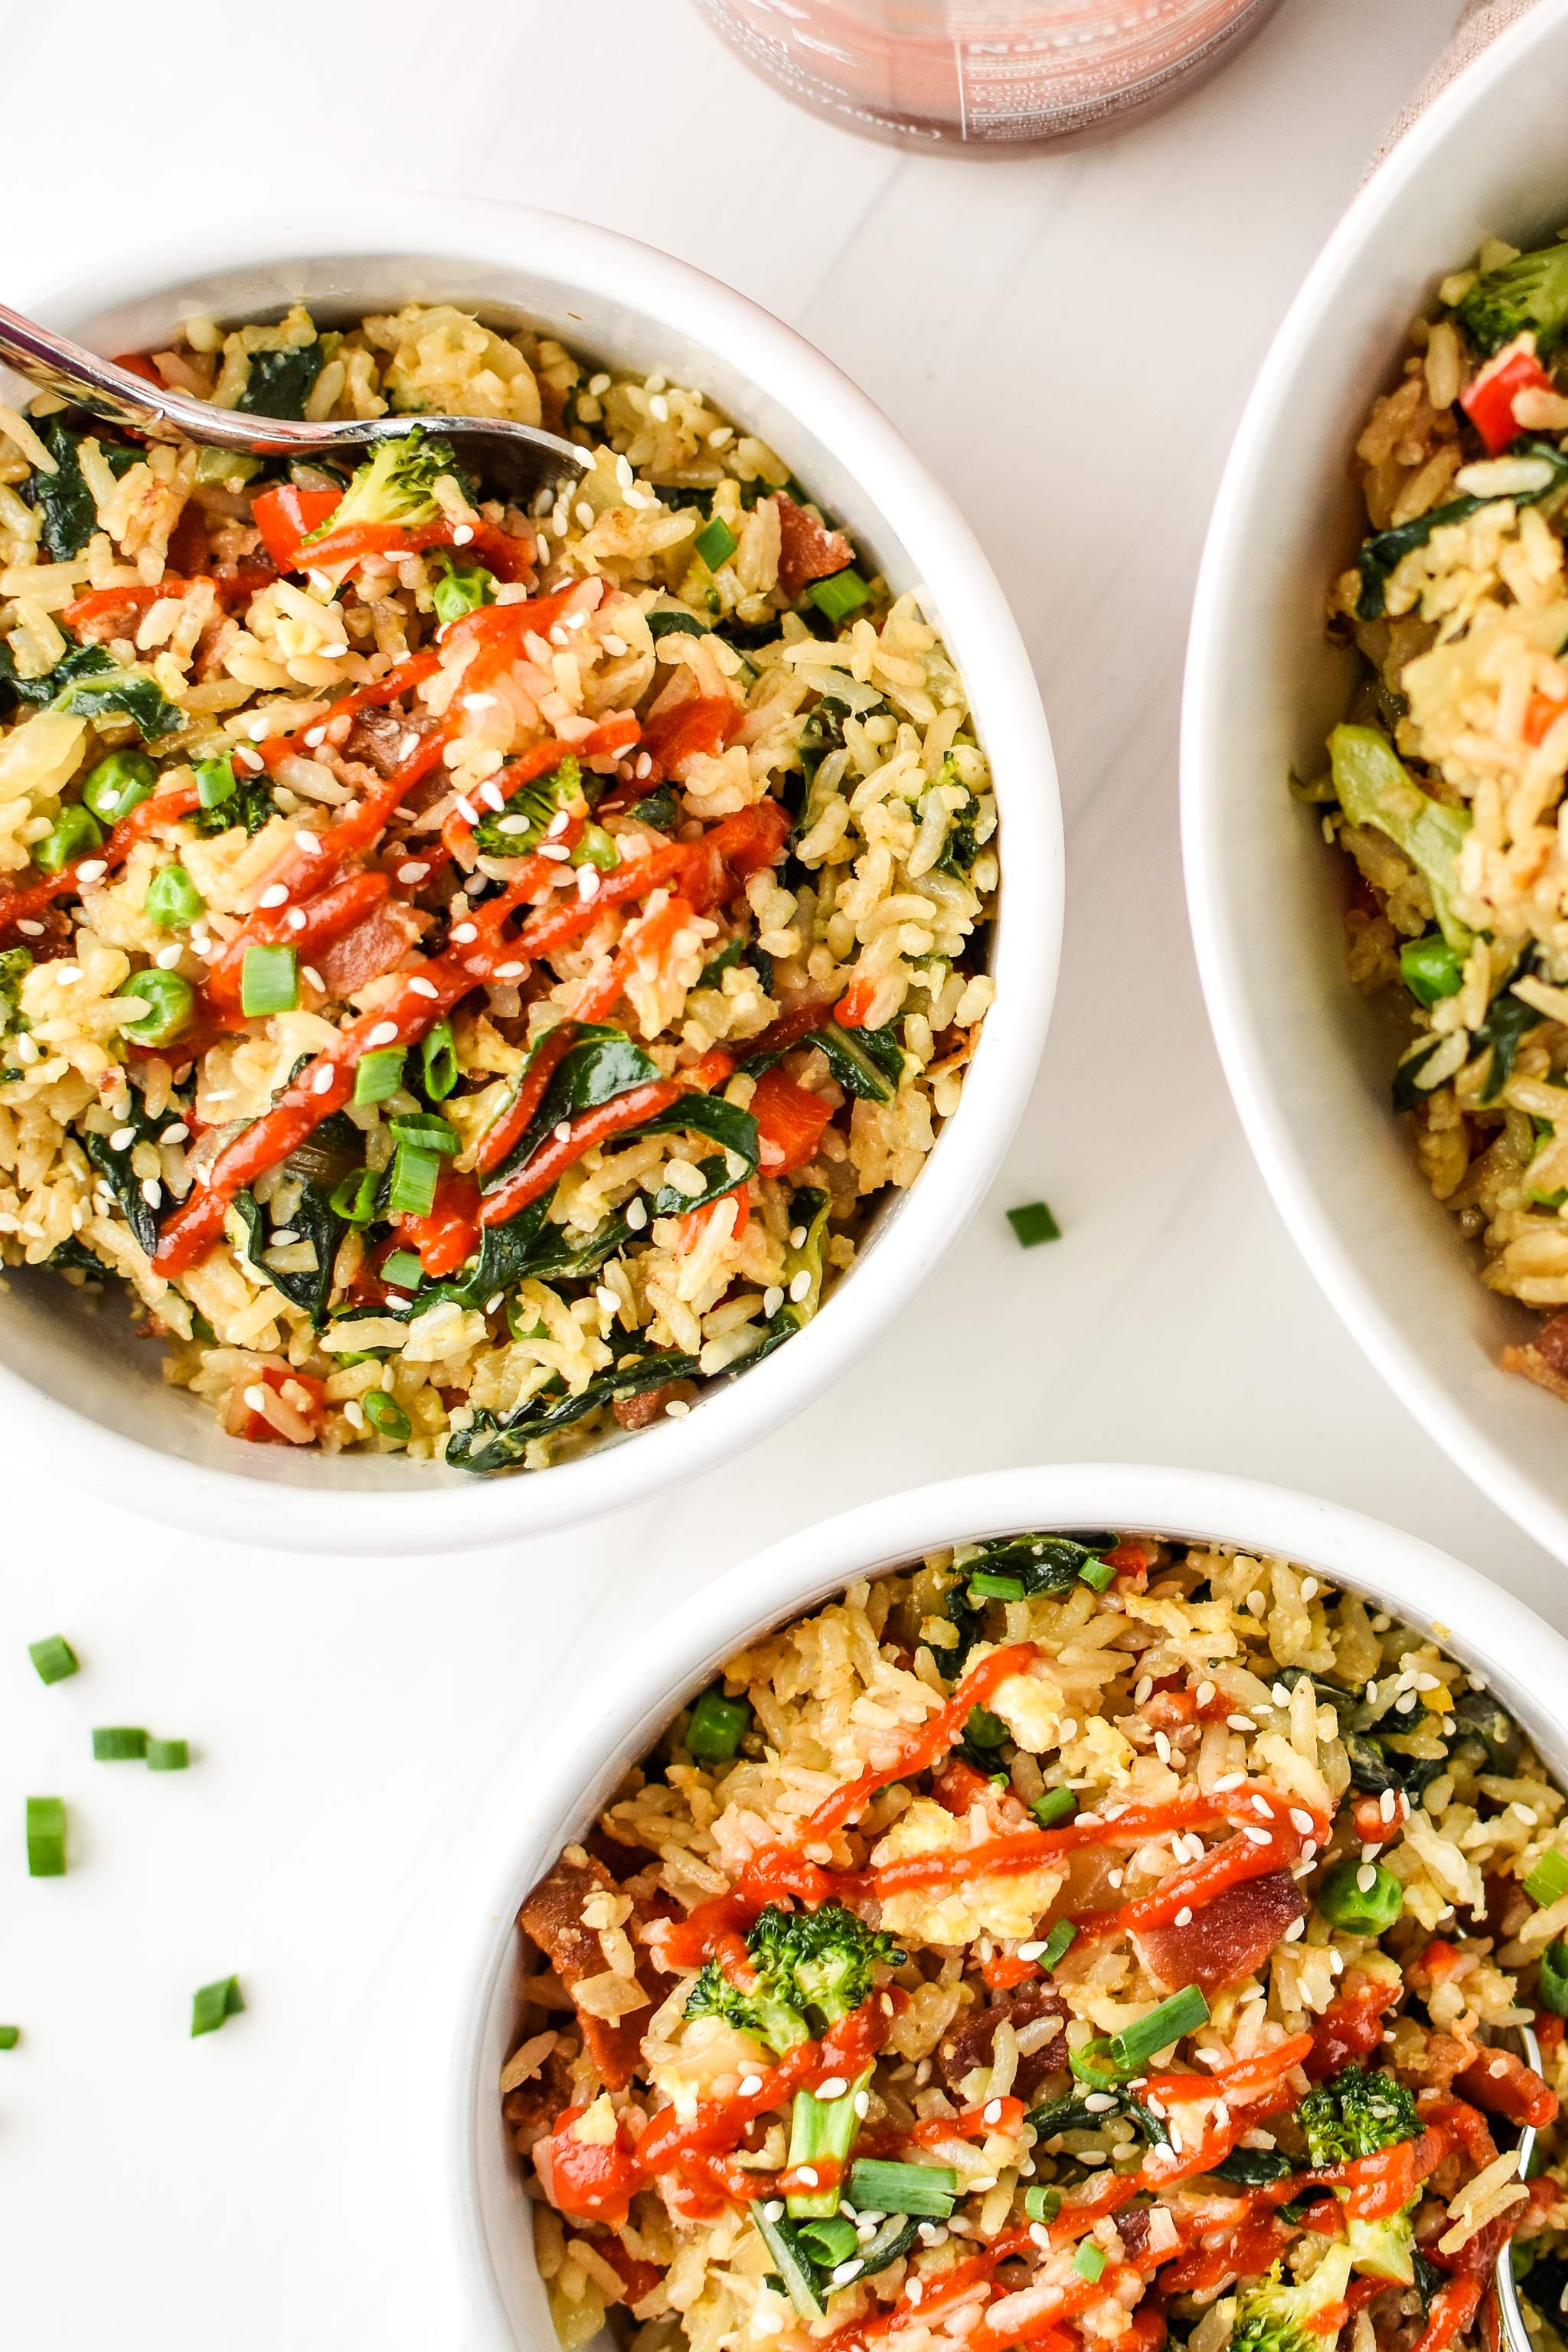 Bowls of veggie packed breakfast fried rice seen from above